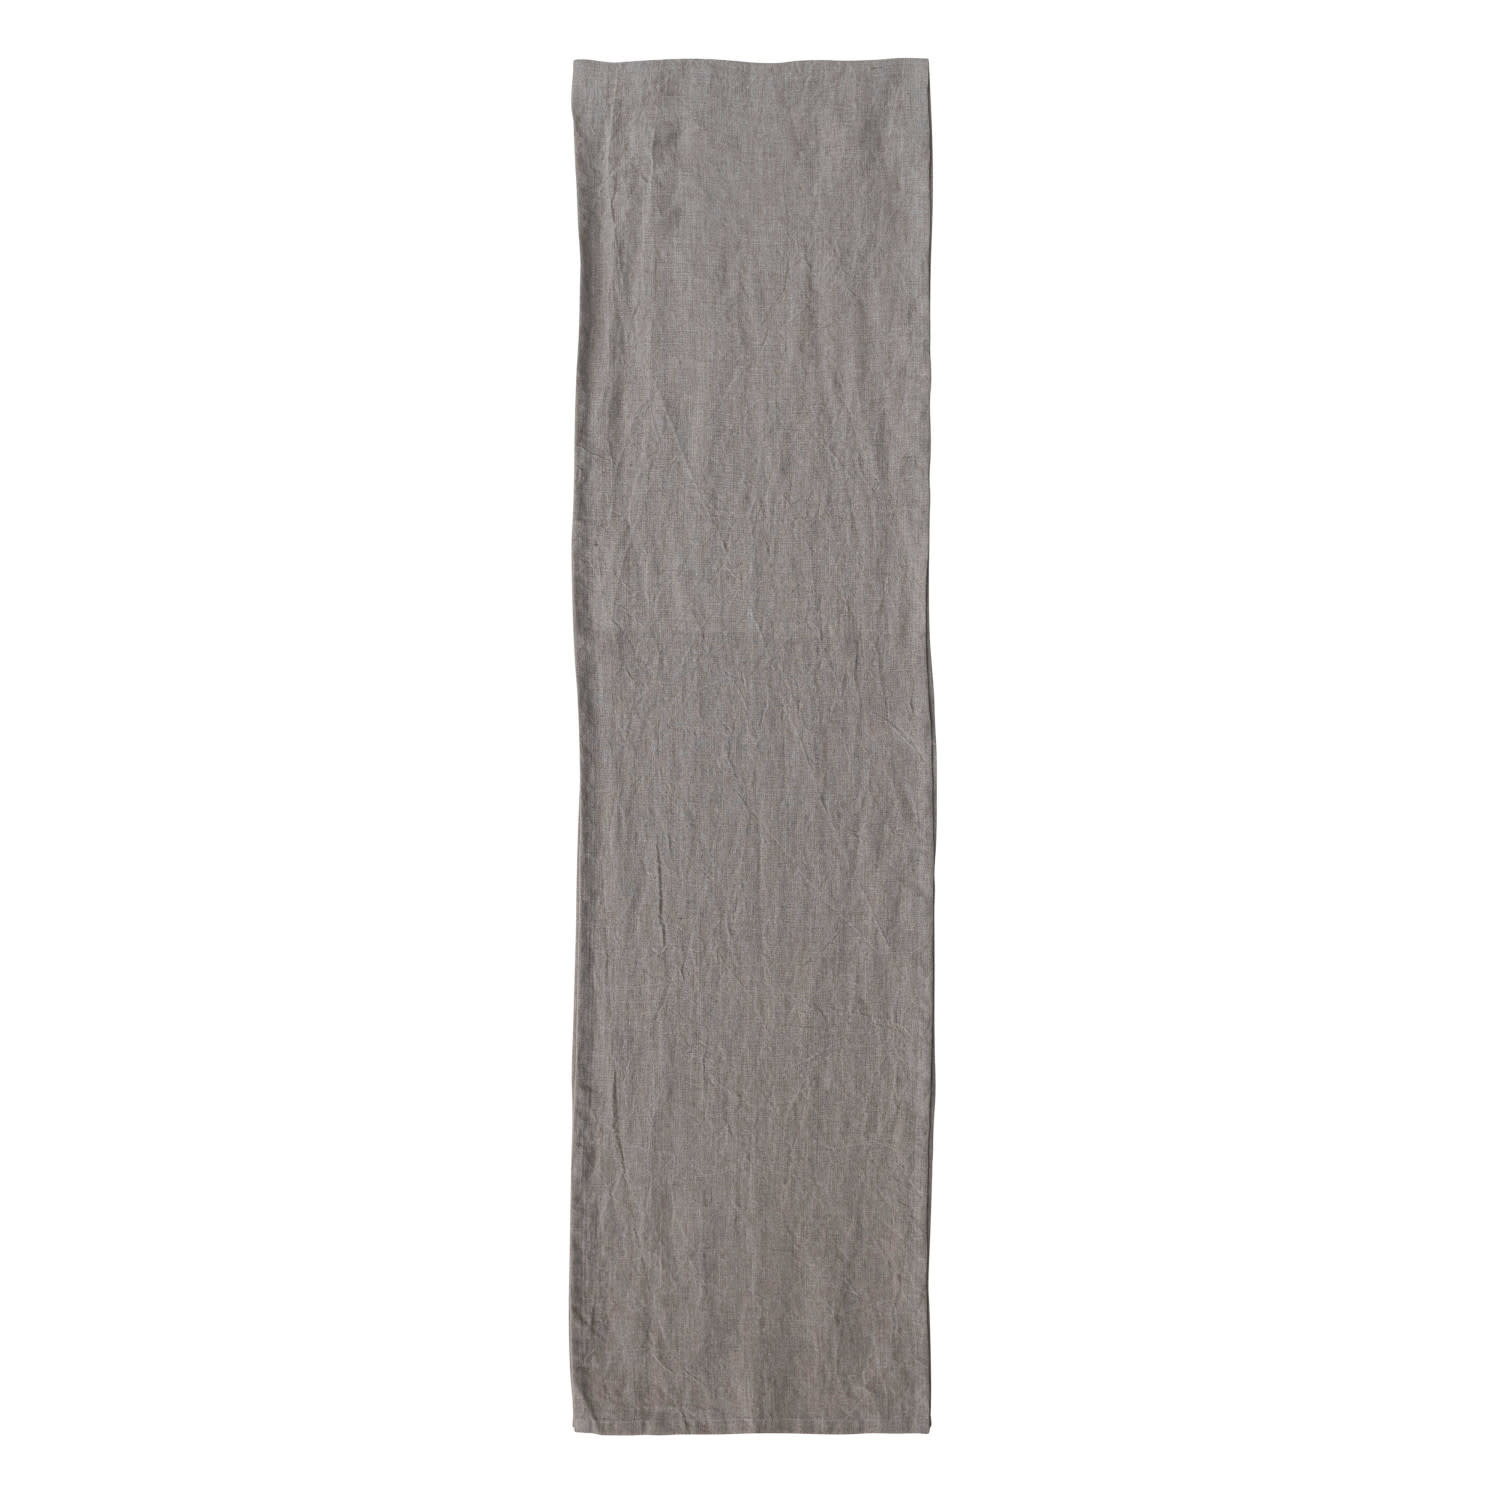 Stonewashed Linen Table Runner, Natural, 108"